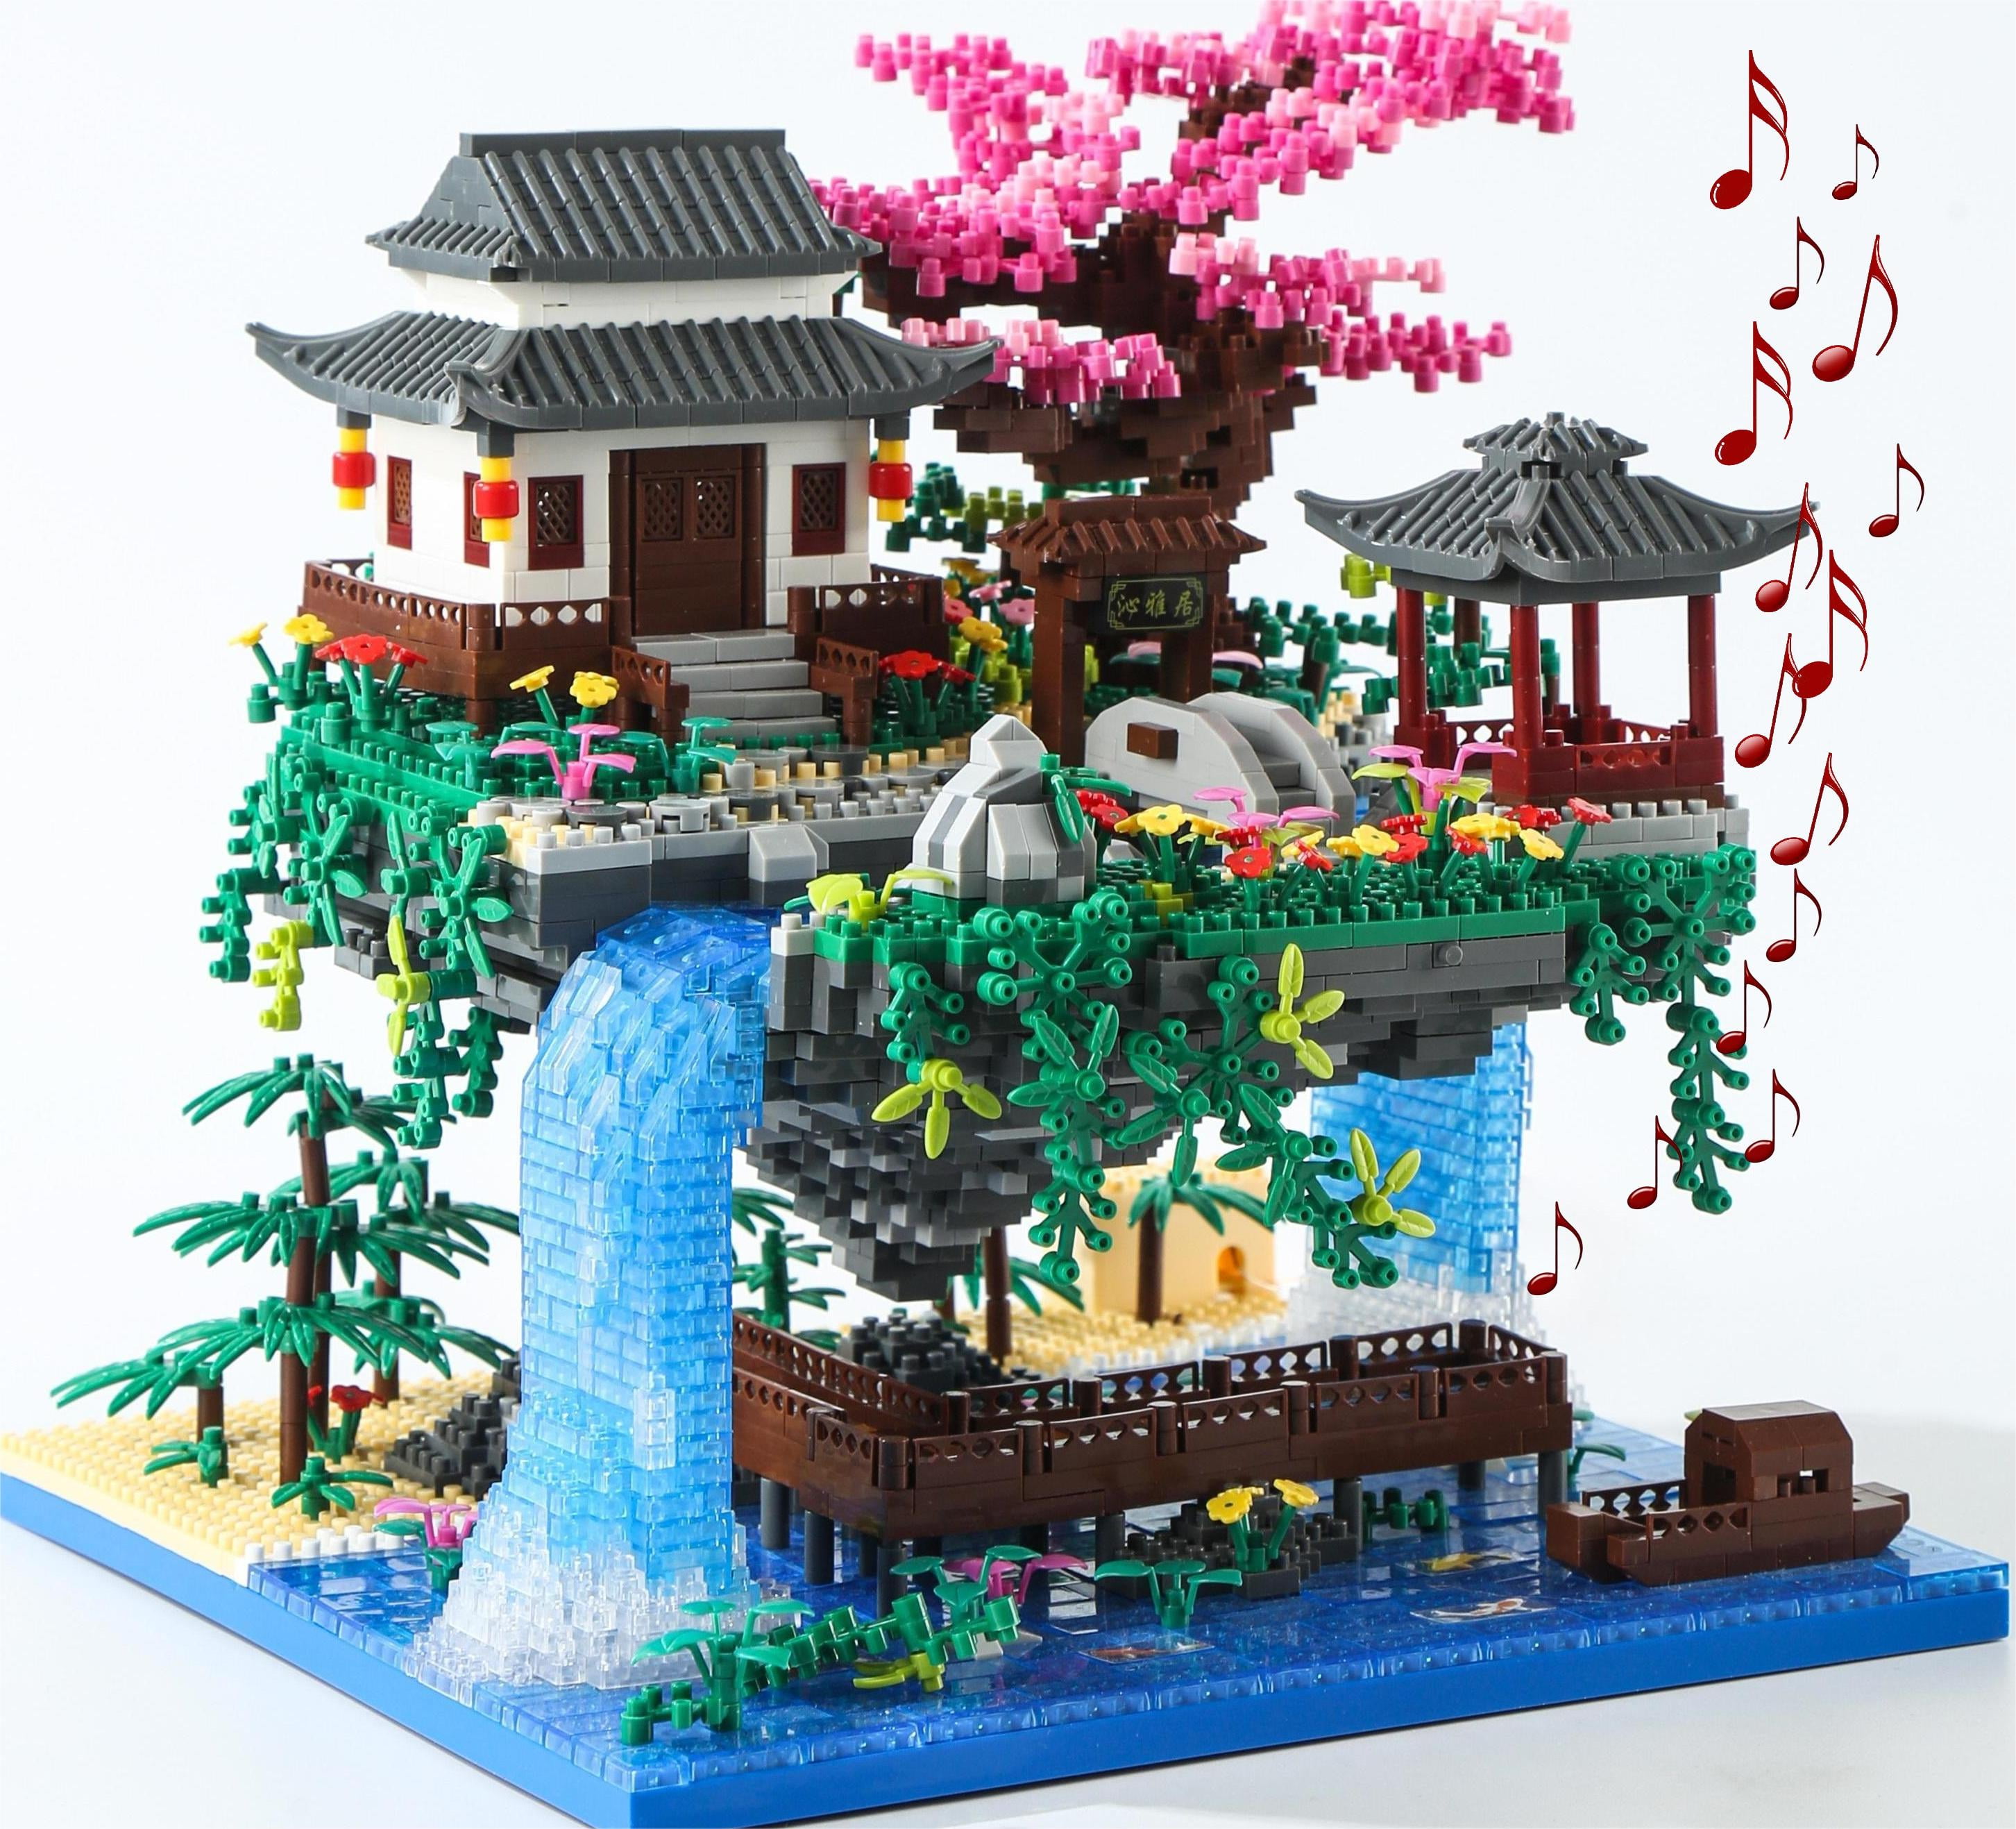 LEGO Icons Bonsai Tree with Cherry Blossom Flowers, DIY Plant Model for  Home Décor or Office Art, Unique Gift for Valentines Day for Him or Her,  Botanical Collection Building Set for Adults